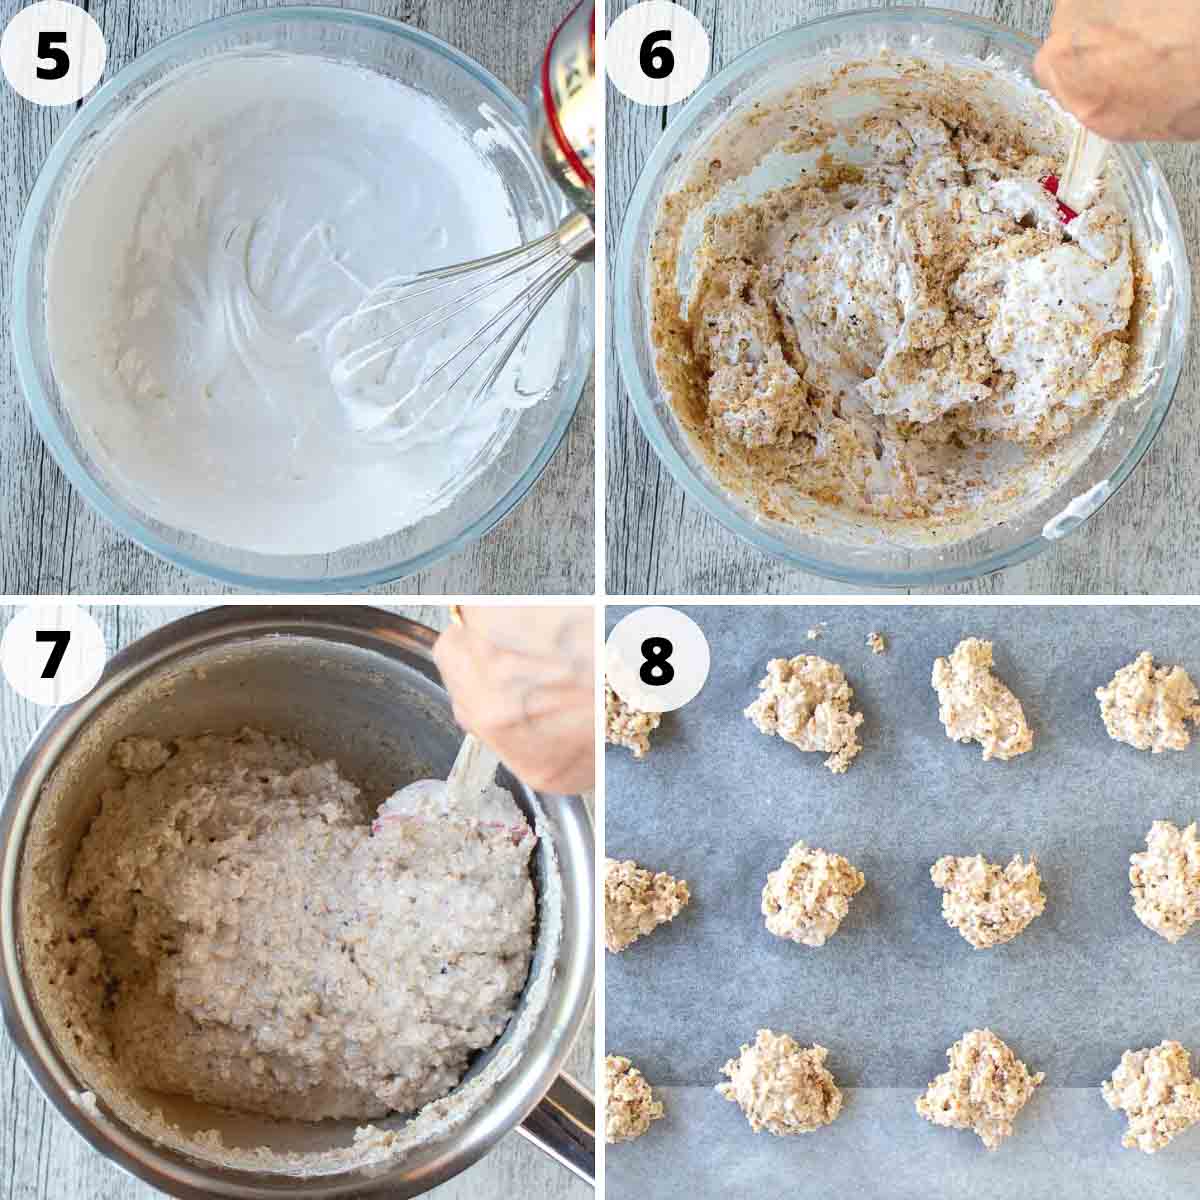 Four step process showing how to make these meringue cookies.